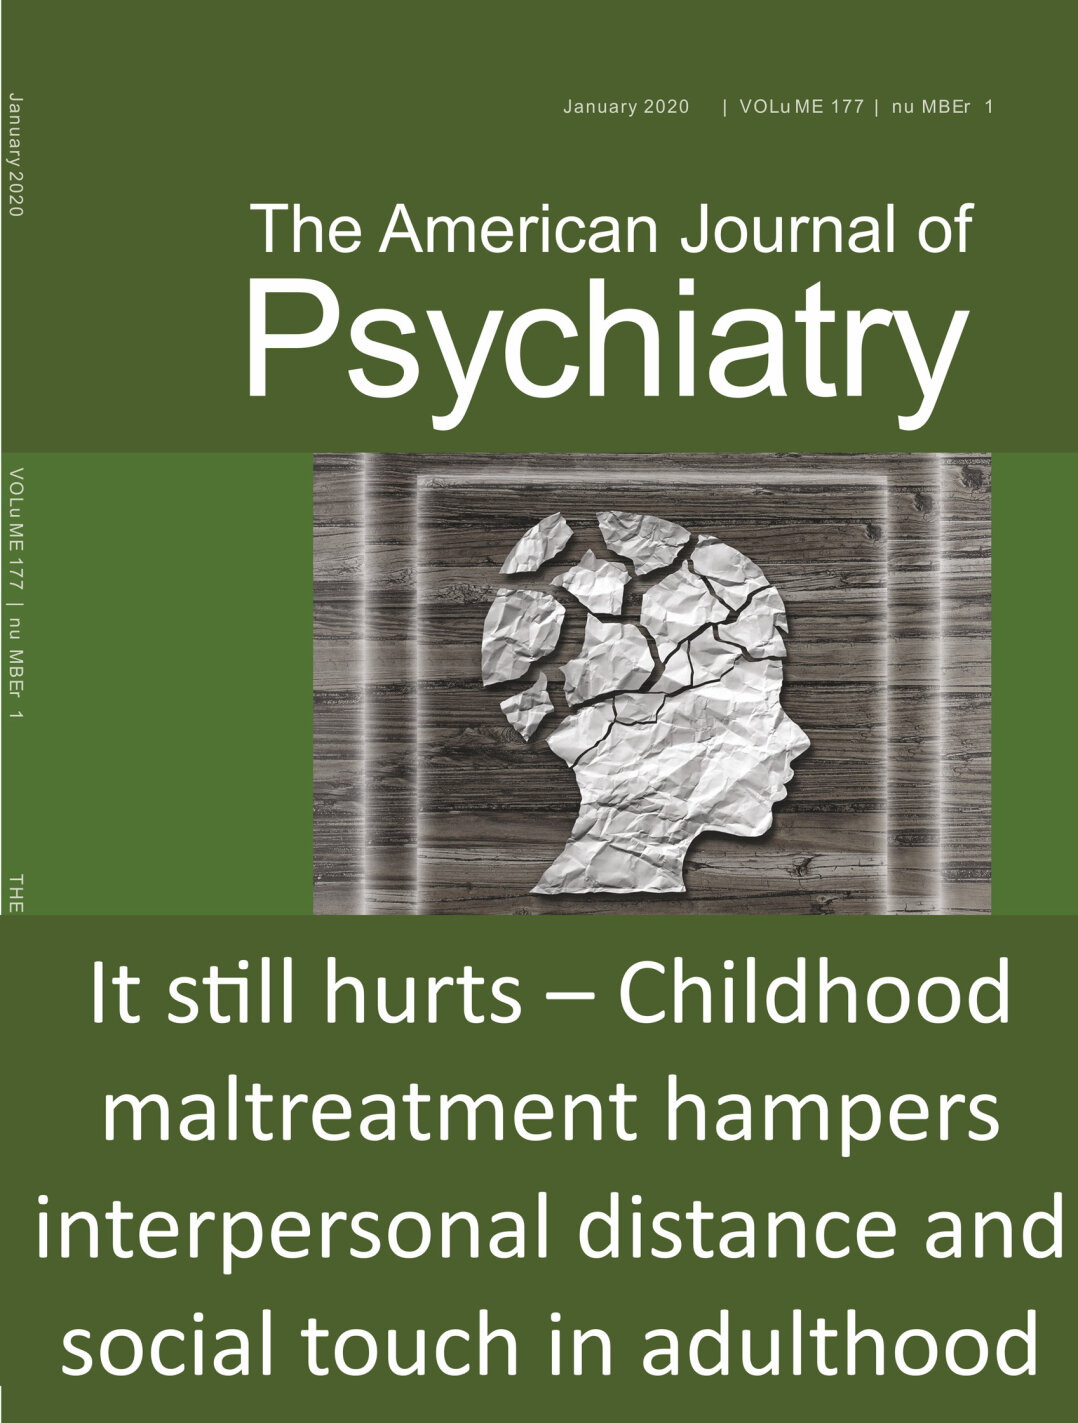 It still hurts: The long shadow of childhood maltreatment